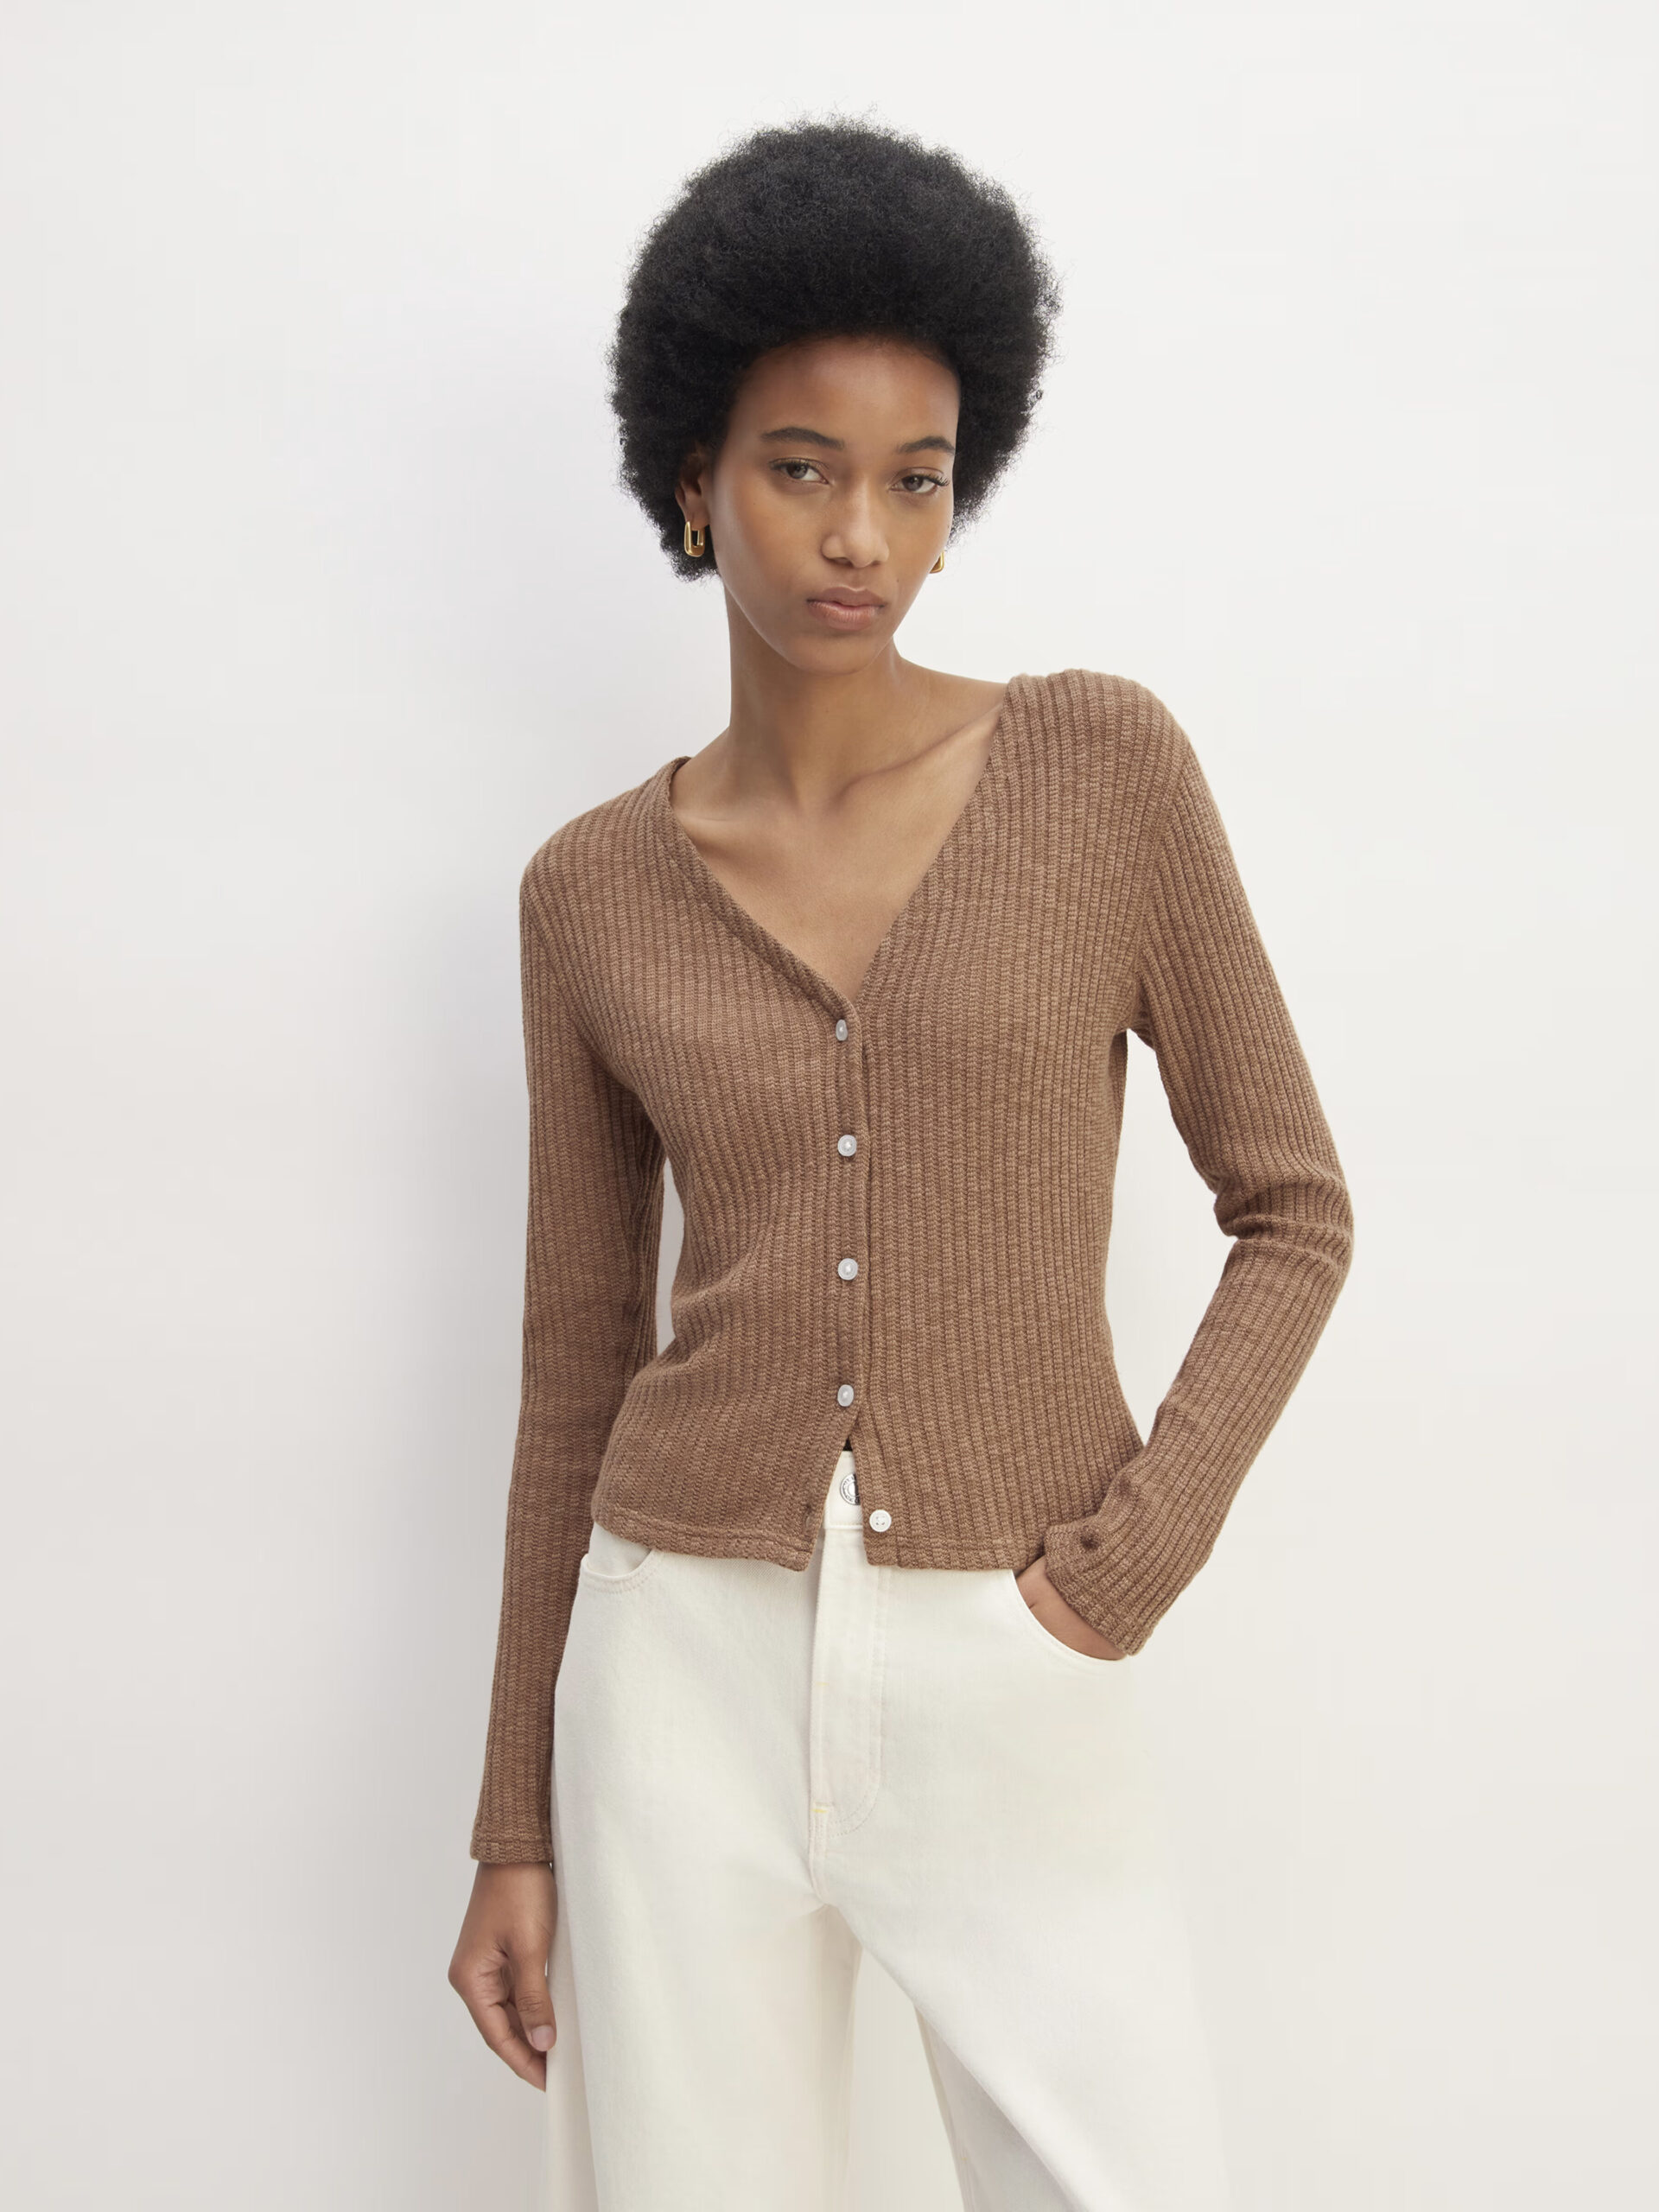 Woman in a brown cardigan and white pants posing against a plain background.